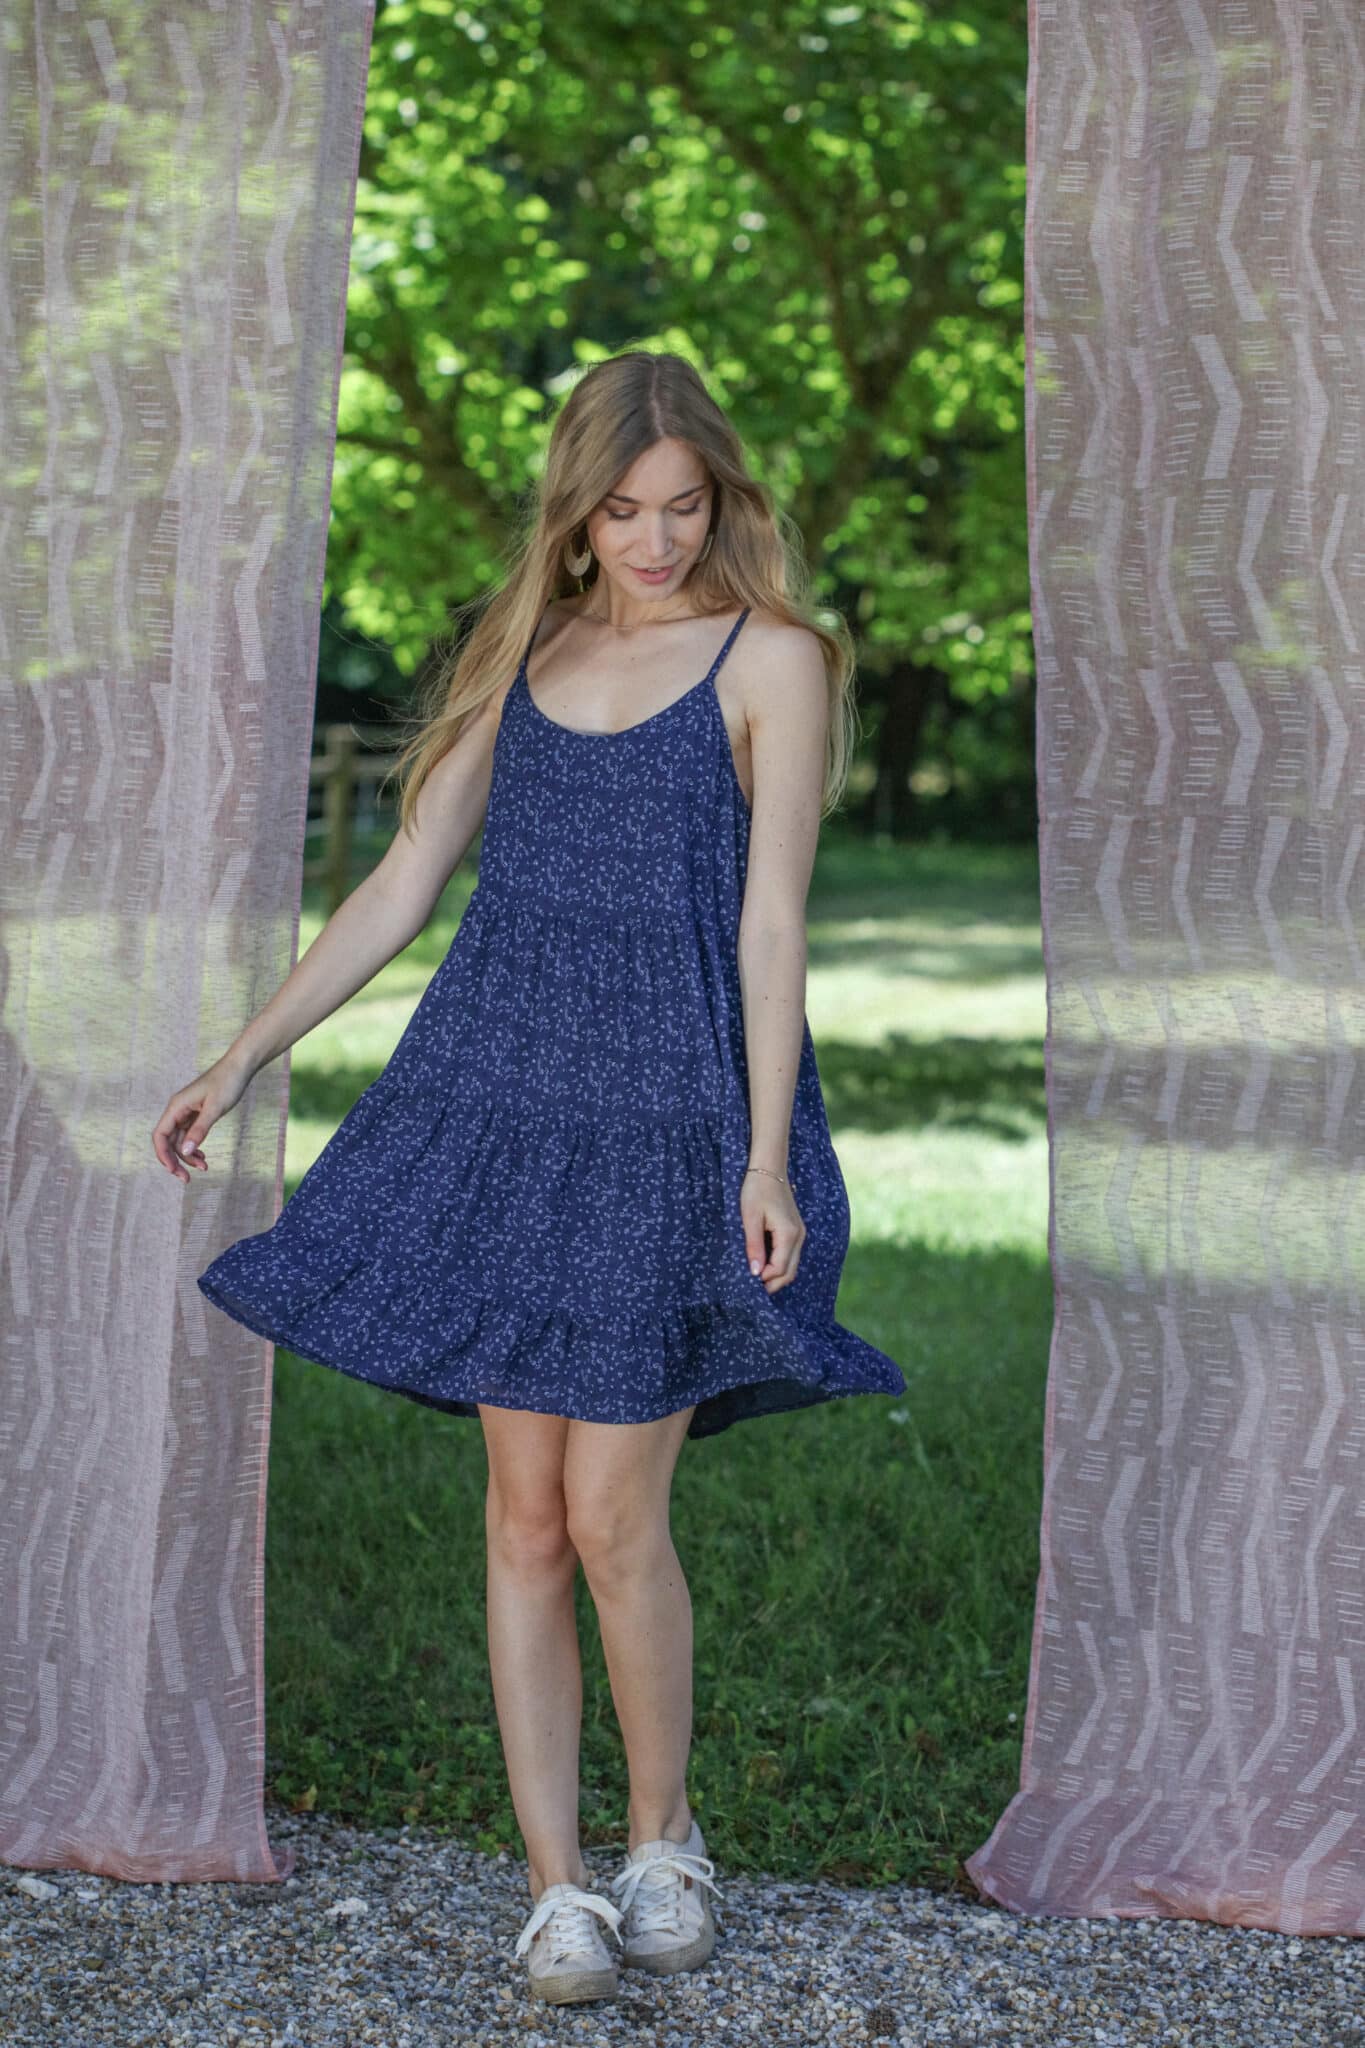 thin navy strap dress printed small flowers